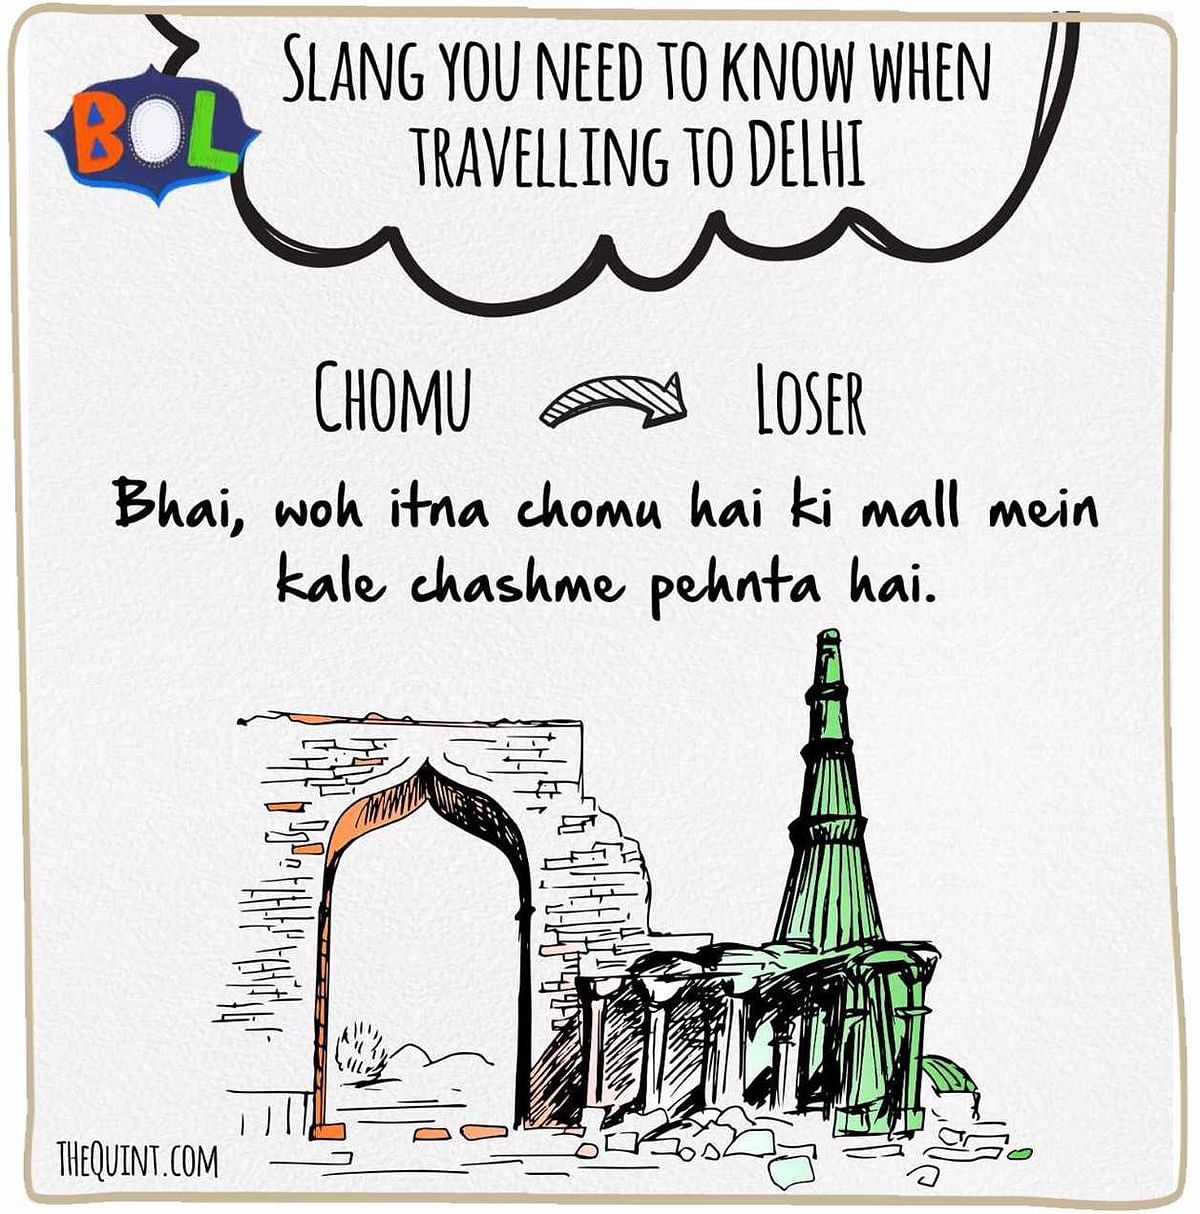 Don’t be a chomu and brush up your Delhiwala lingo!